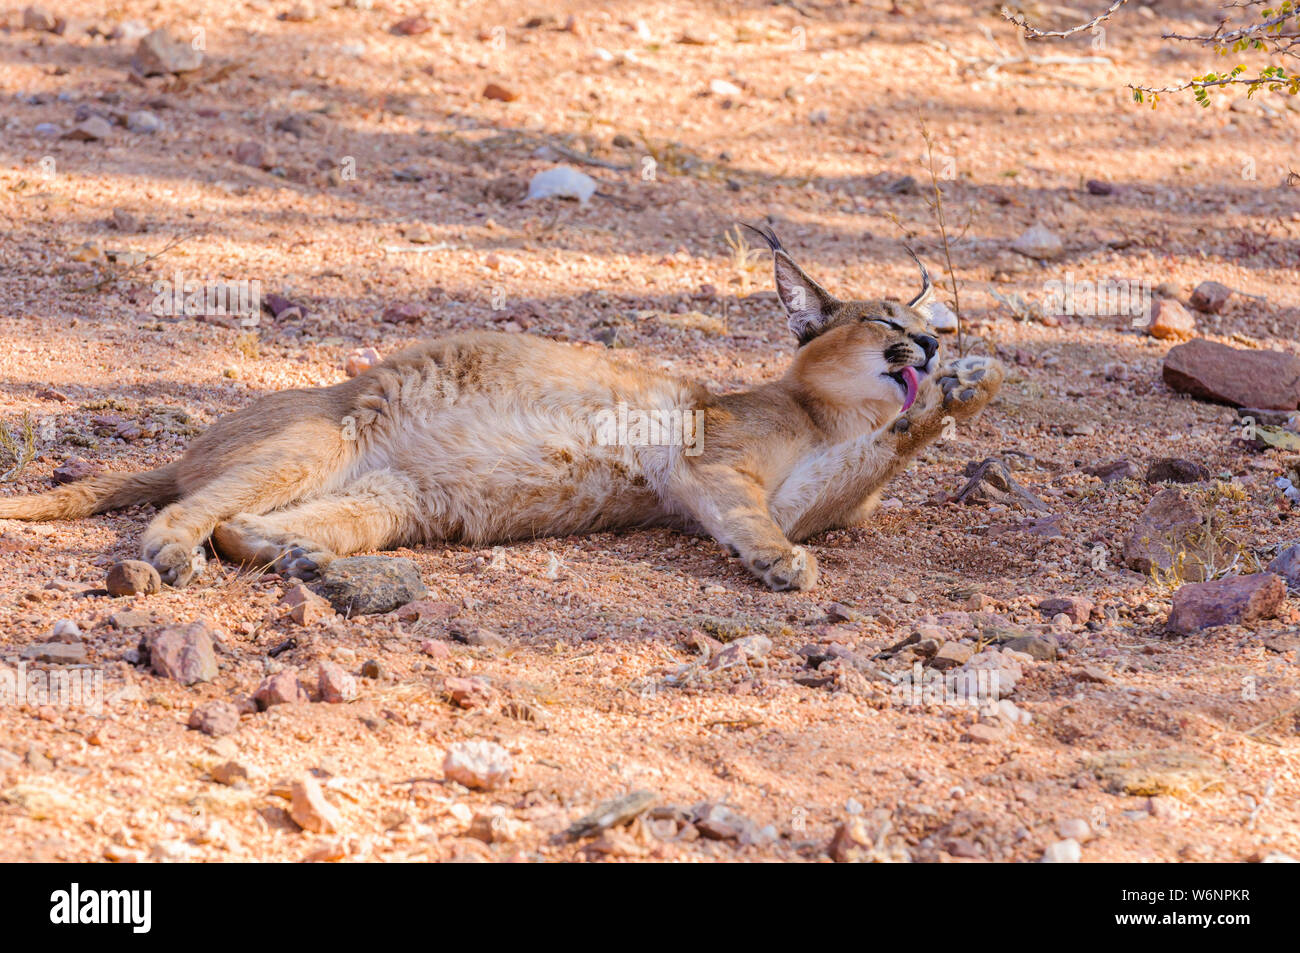 Caracal (Caracal caracal) washes its paws, Namibia Stock Photo